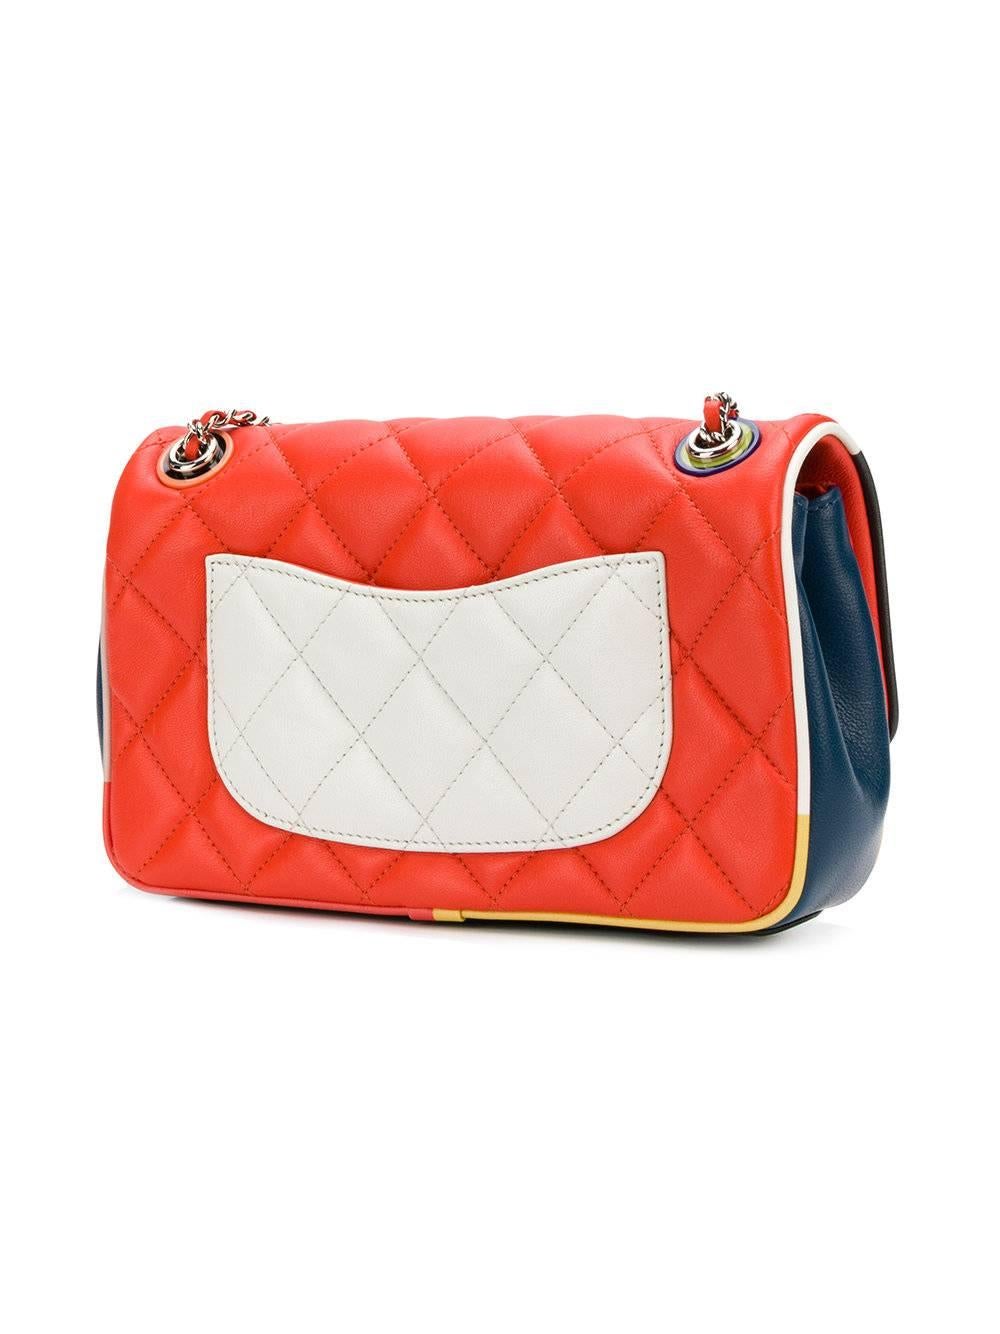 This Red lambskin quilted flap bag from Chanel Vintage featuring a foldover top with magnetic closure, a main internal compartment, a signature interlocking CC logo and a chain link strapThe perfectly timeless everyday bag!

Colour: